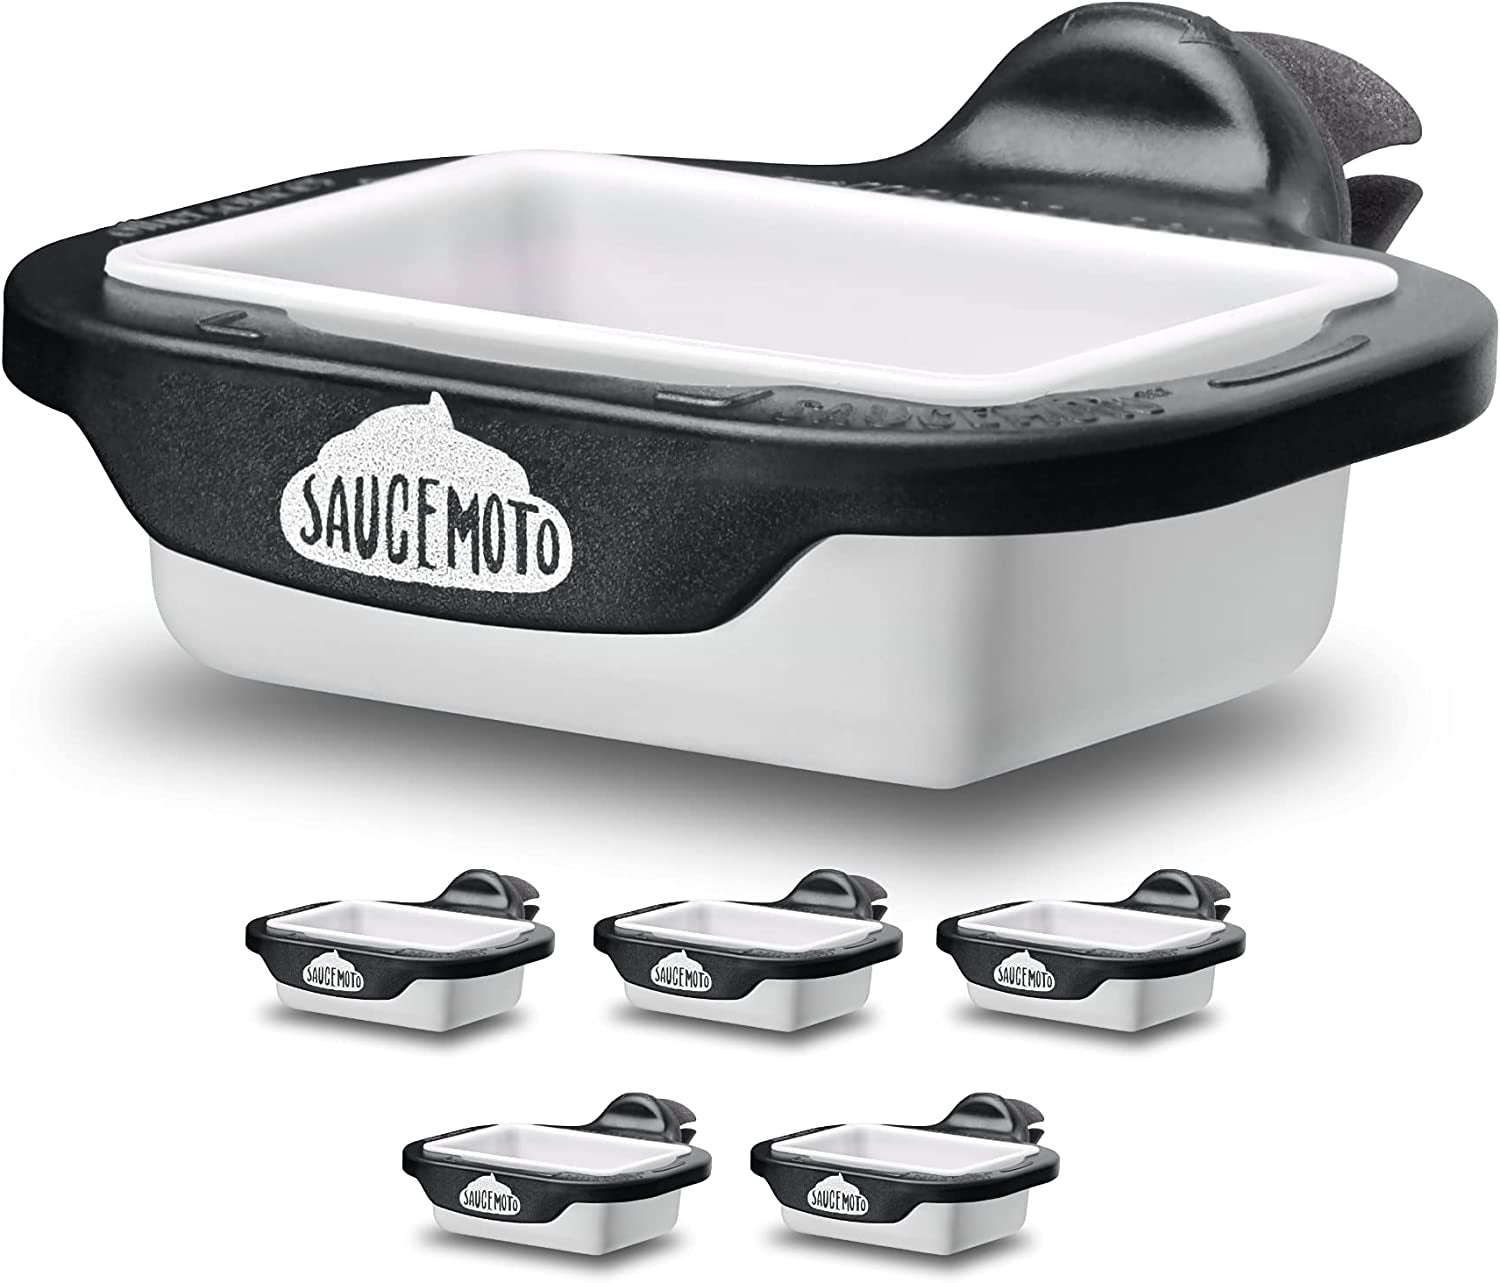  Dip Clip | An in-car sauce holder for ketchup and dipping sauces. As seen on Shark Tank (2 Pack, Black)